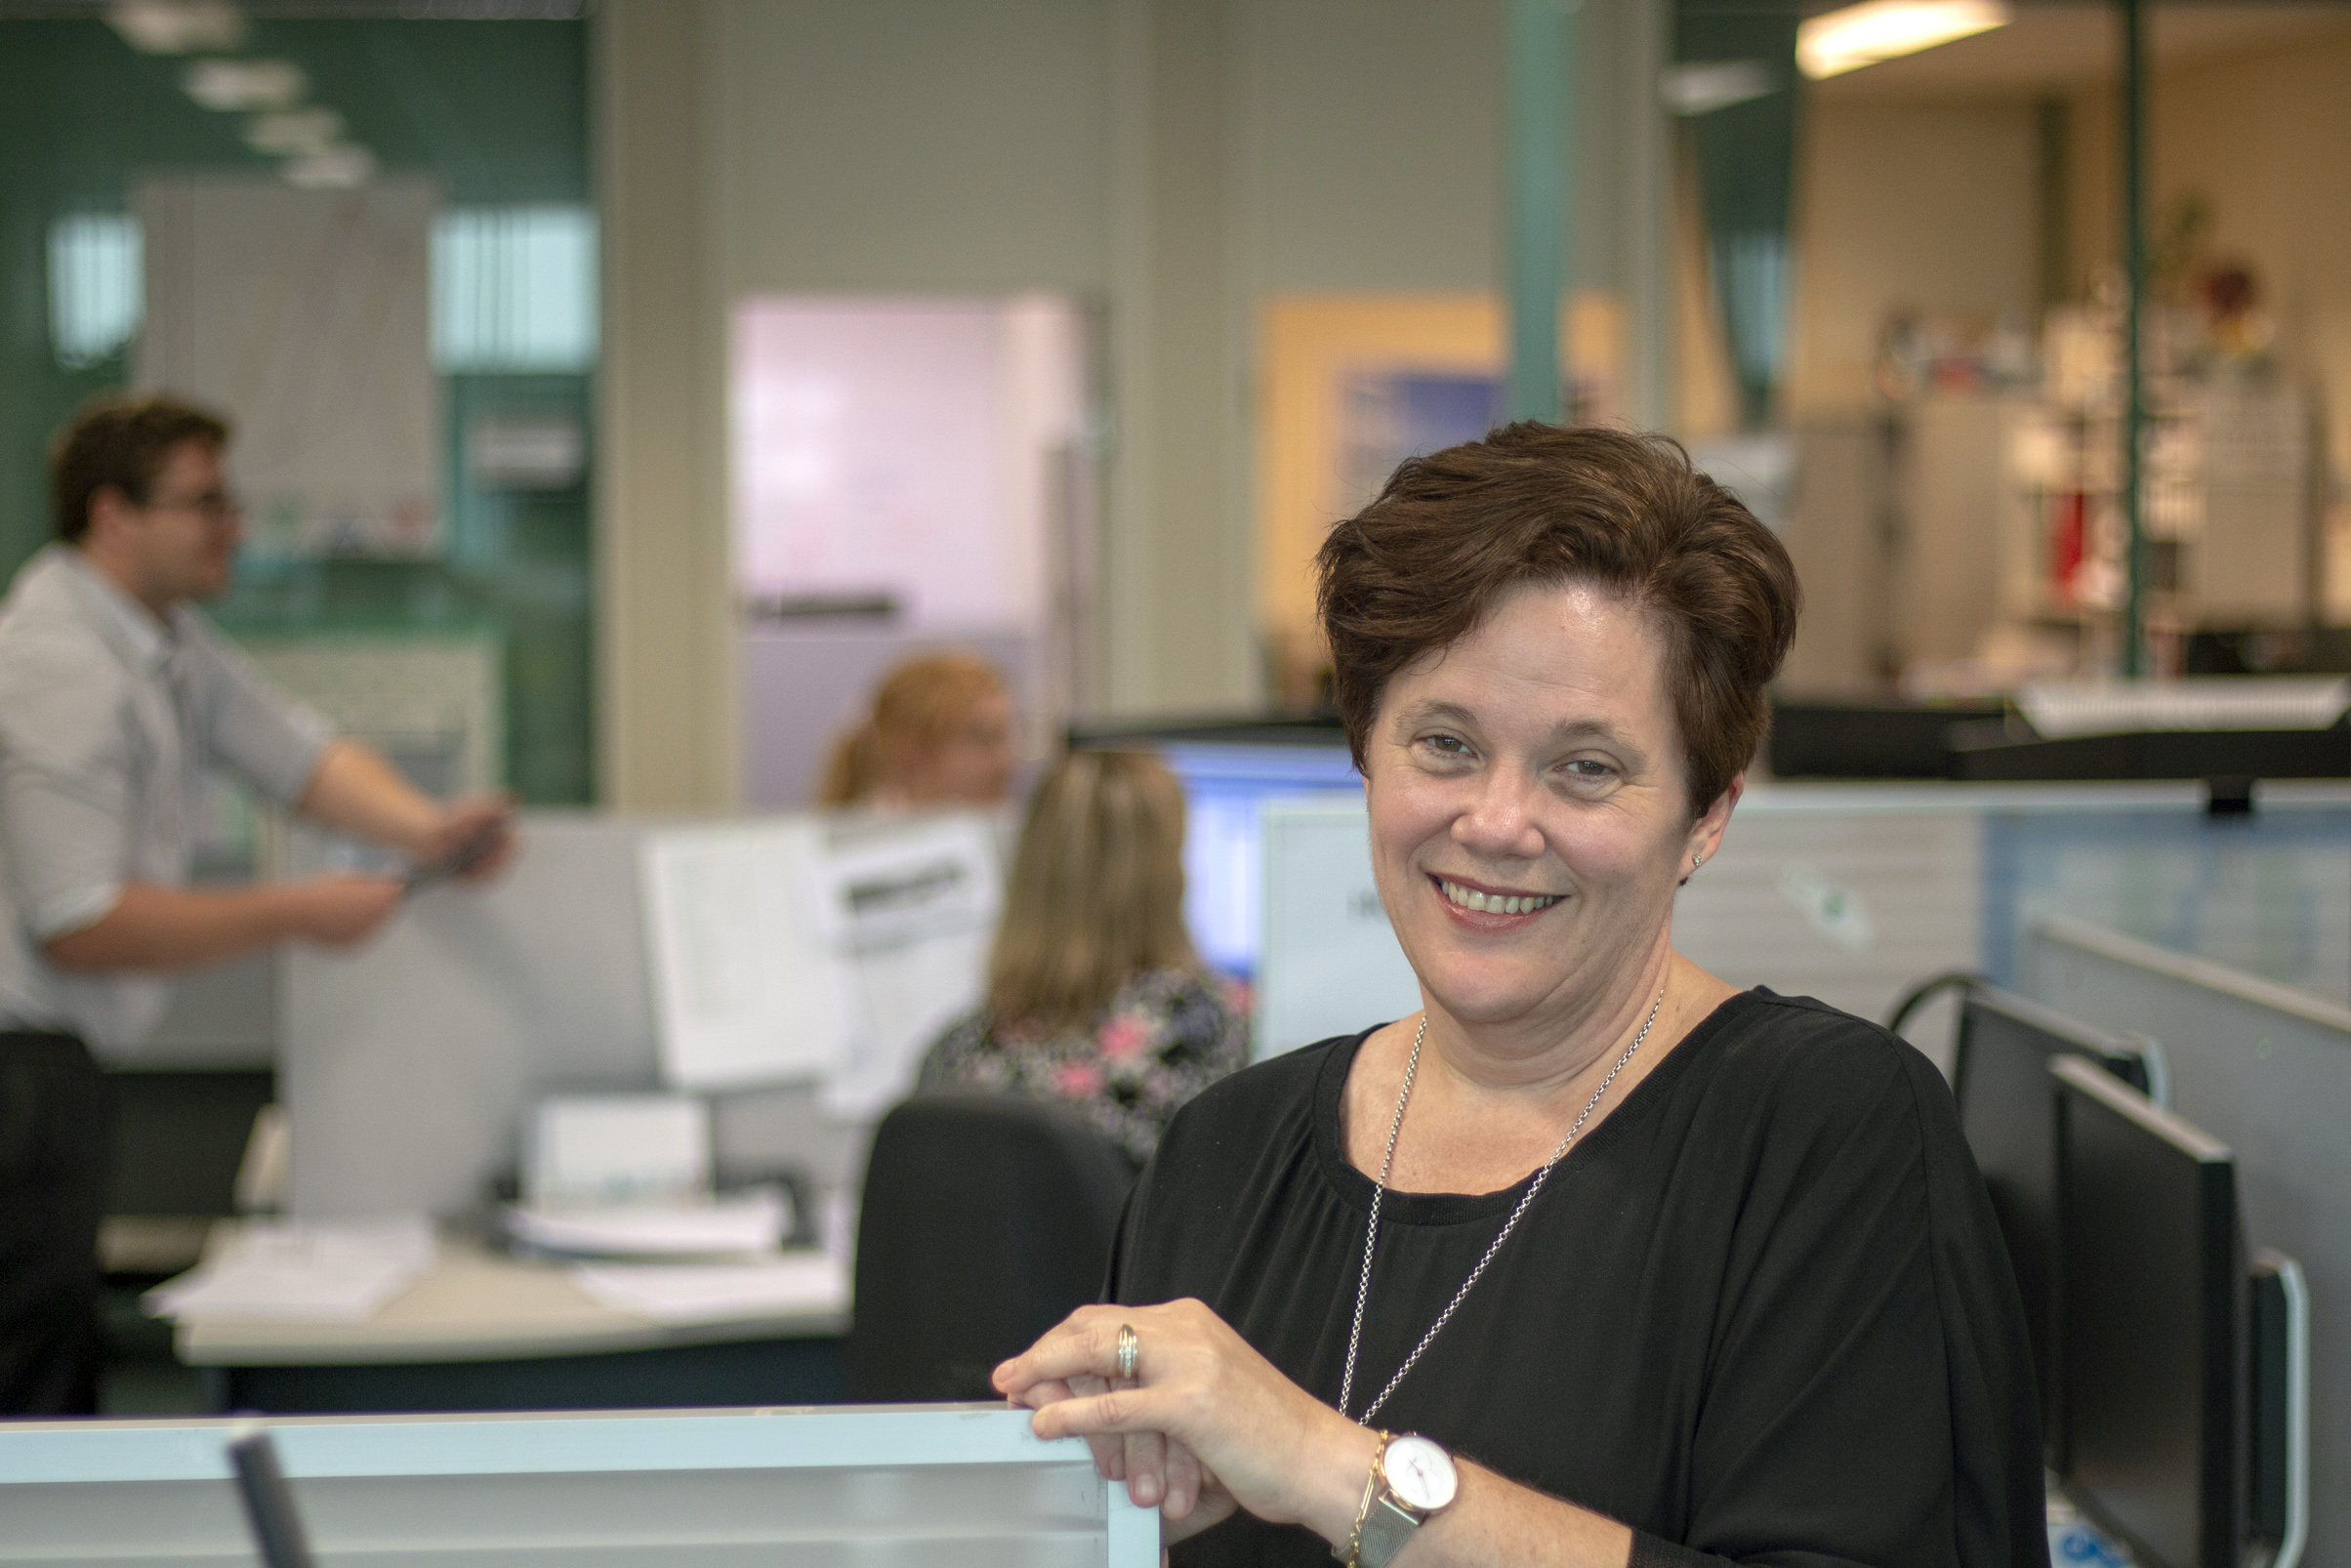 Janine Becker, Director of Finance and Business Services at Waikato Regional Council